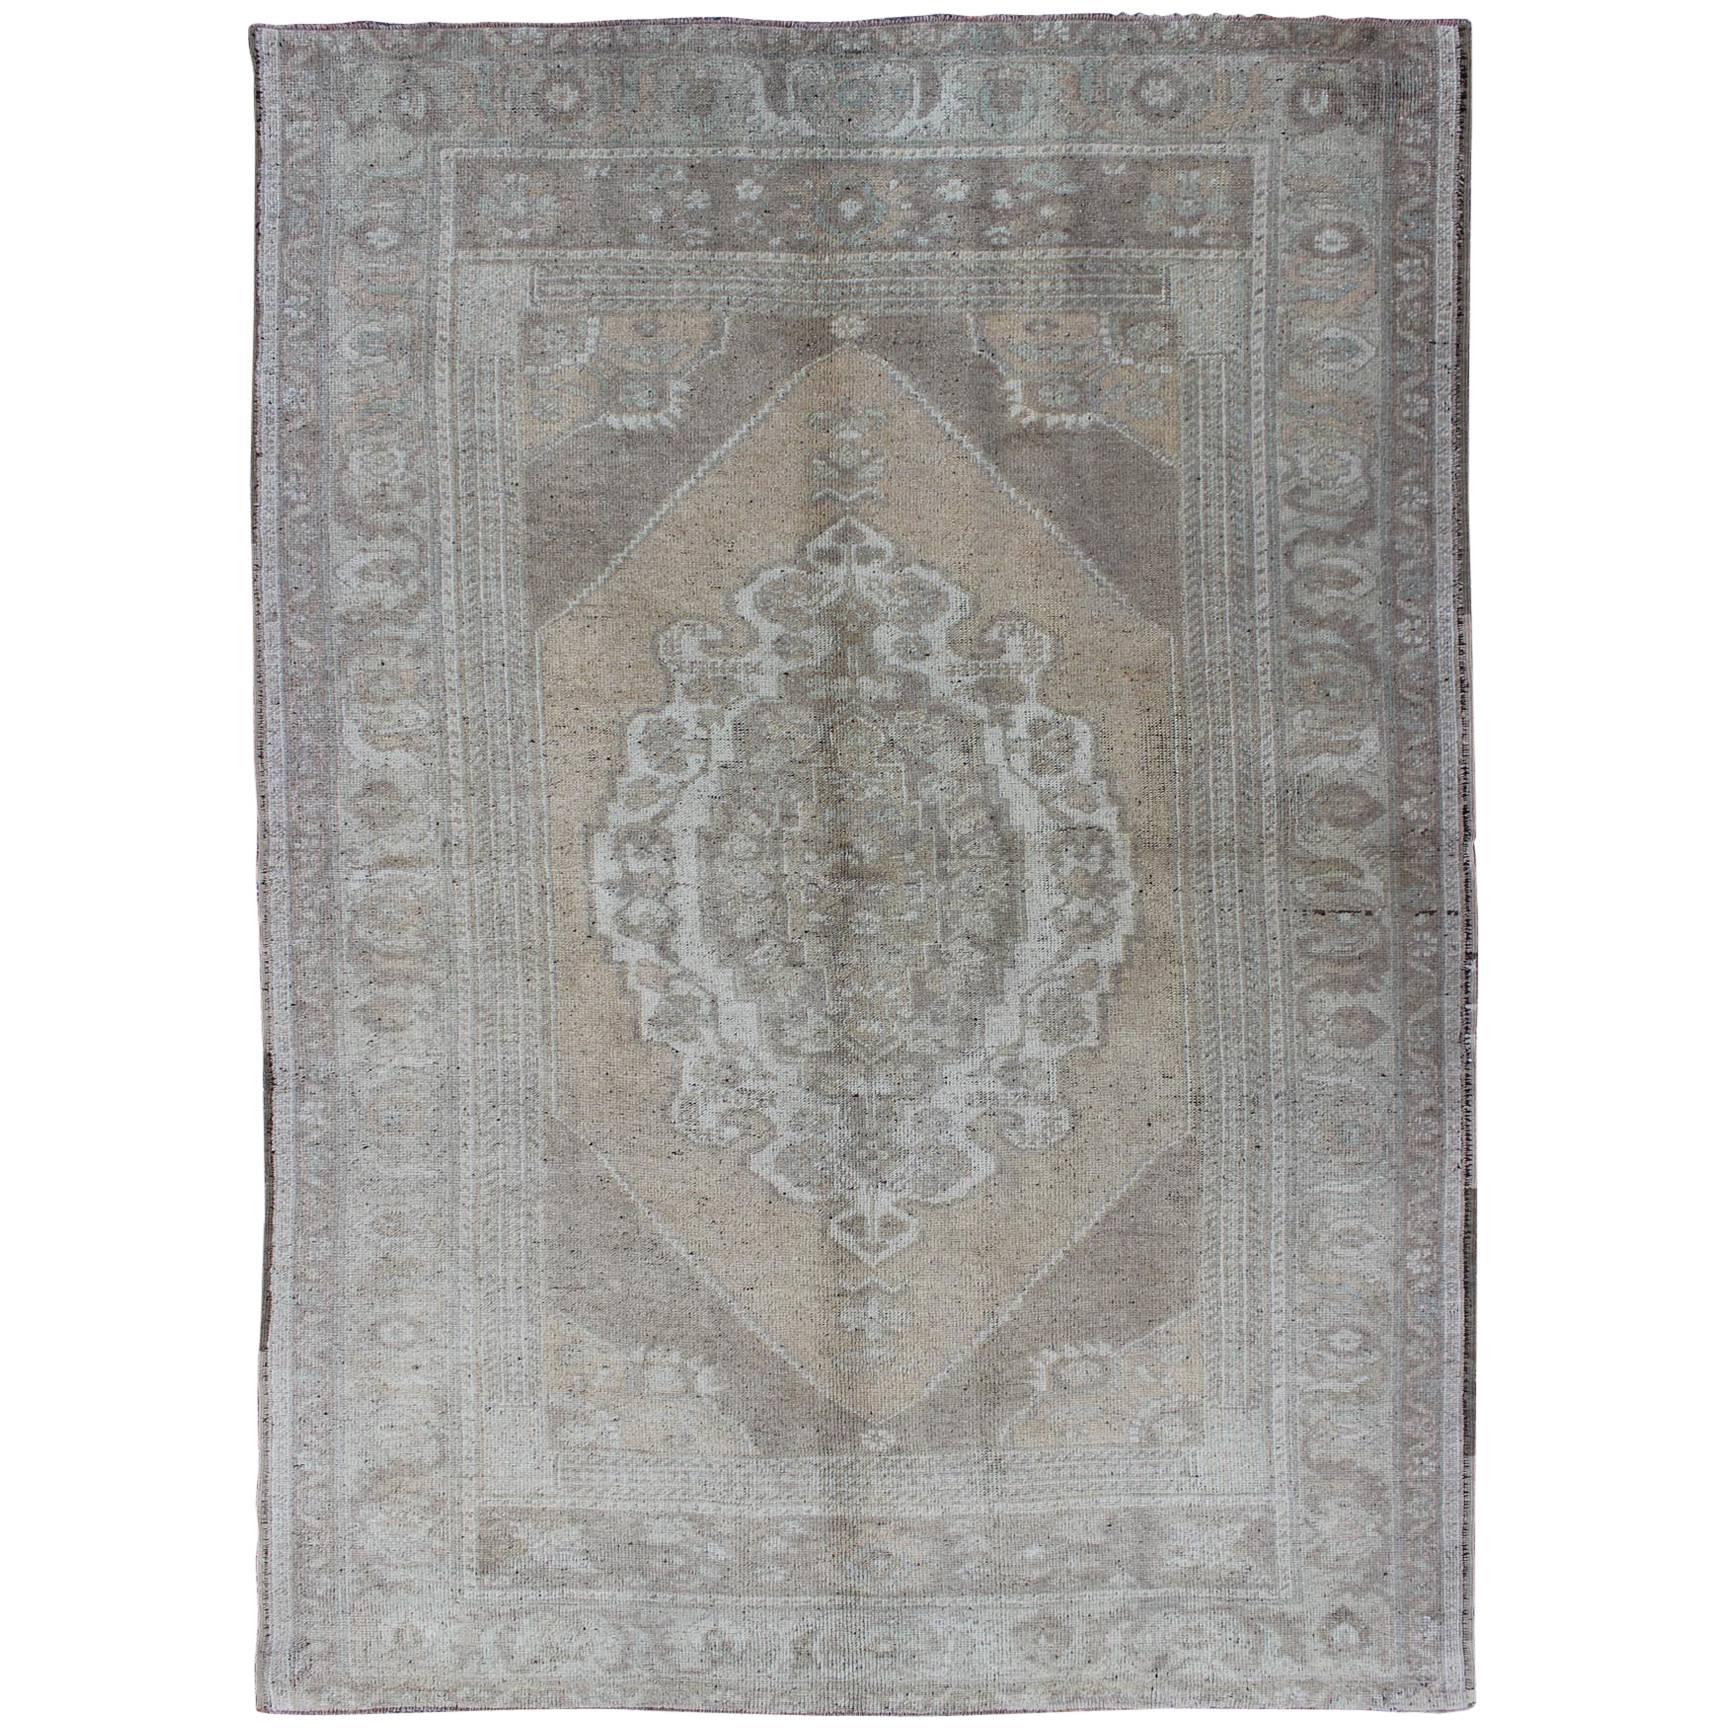 Muted Colors Vintage Turkish Oushak Rug with Medallion Design in Lt. Green